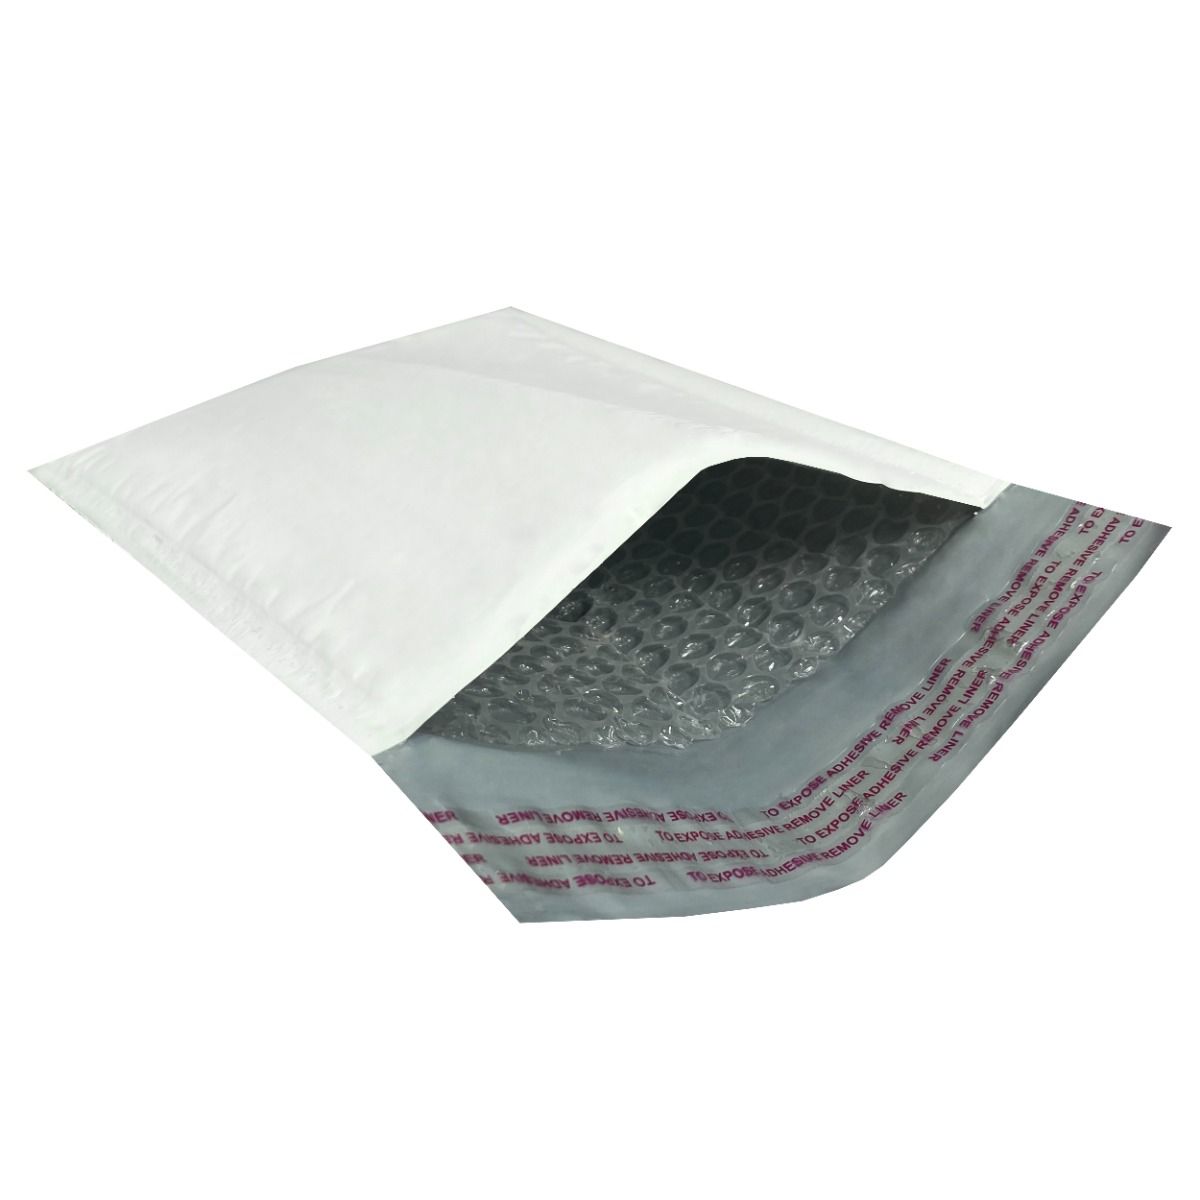 Poly Mailers 6.5X10 #0 - Pack of 250